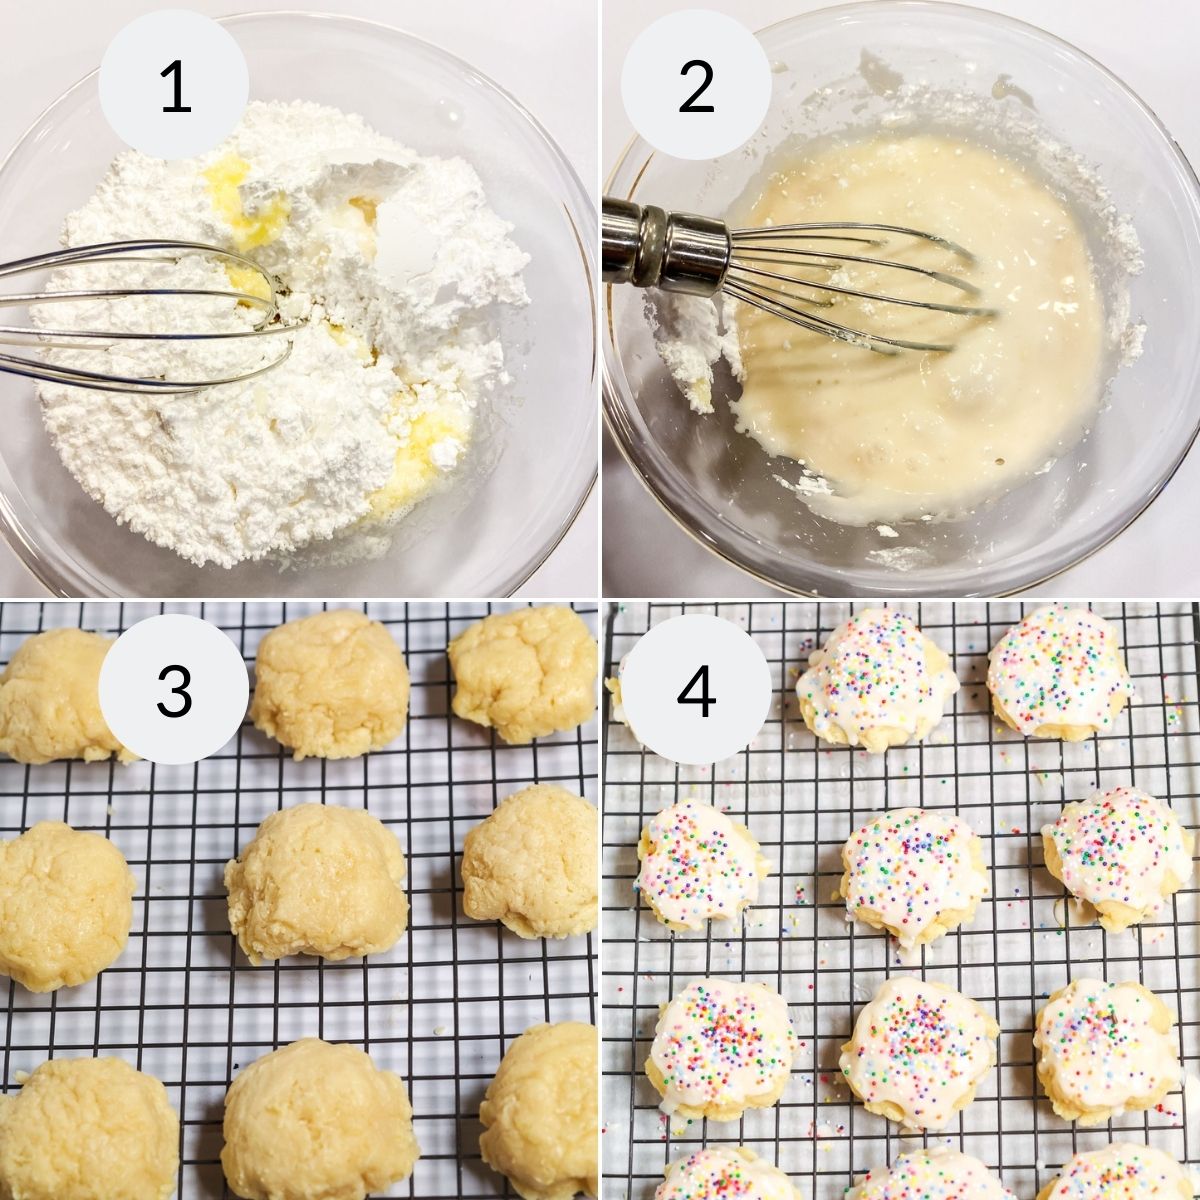 Step by step process for making Italian Ricotta cookies